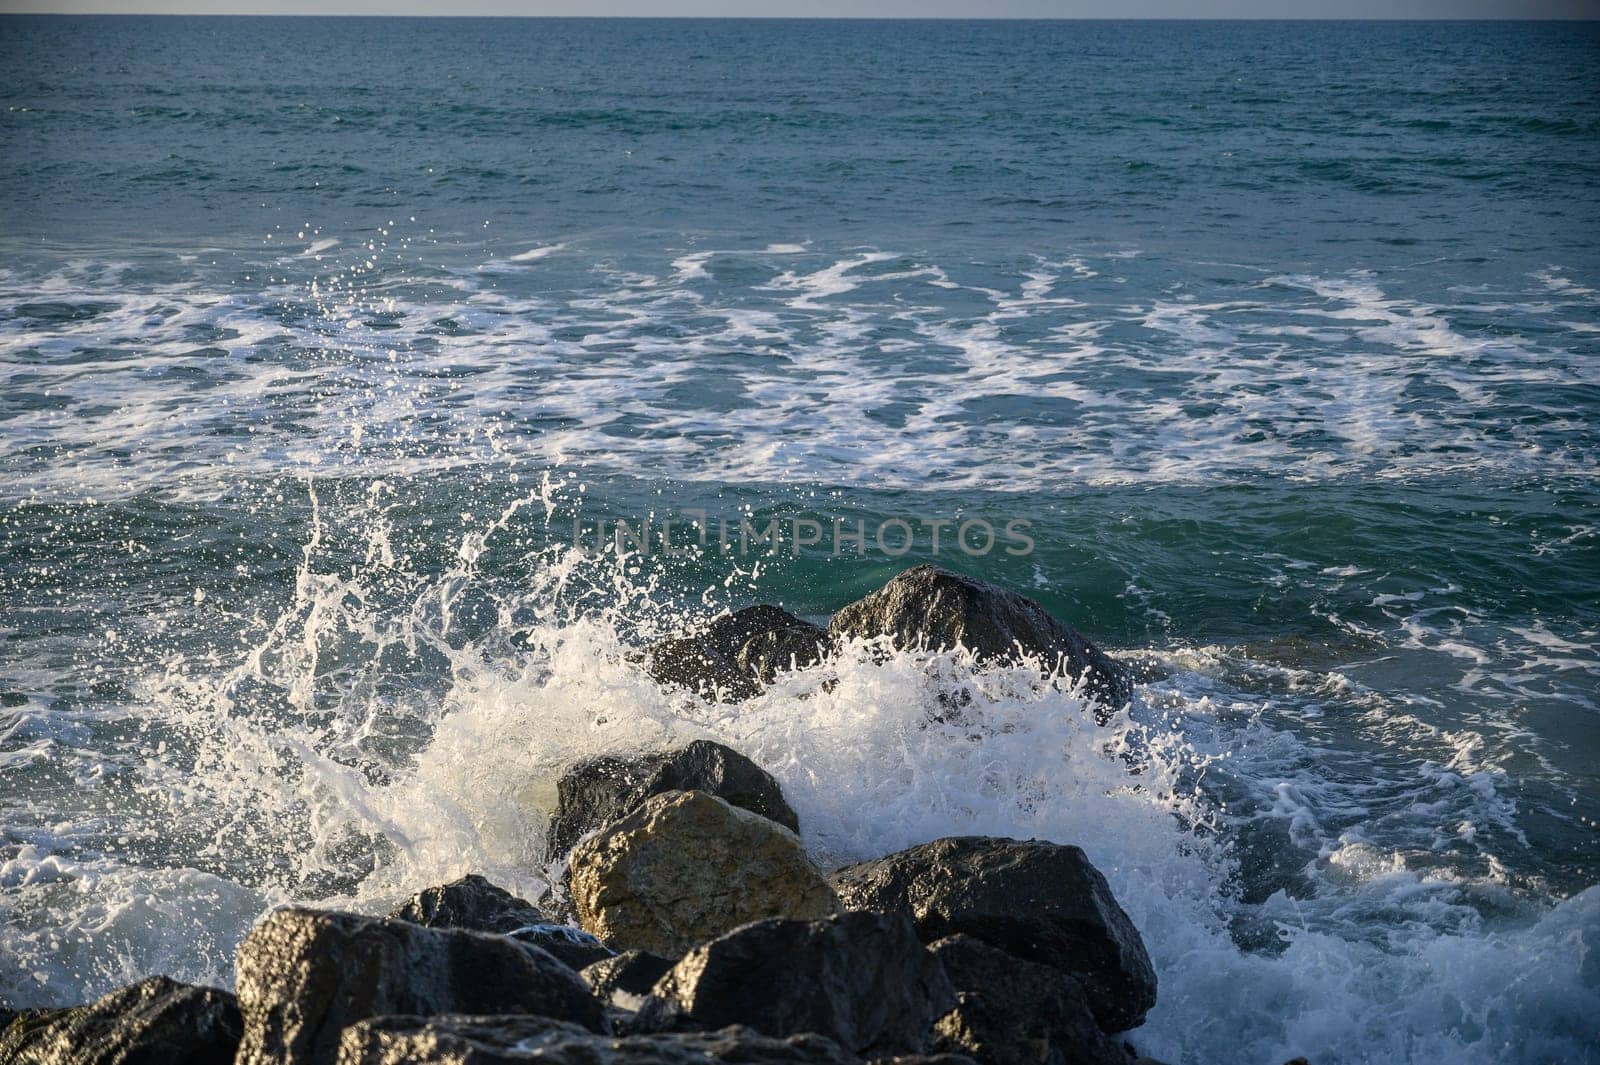 waves stones in the sea on the Mediterranean in winter 9 by Mixa74